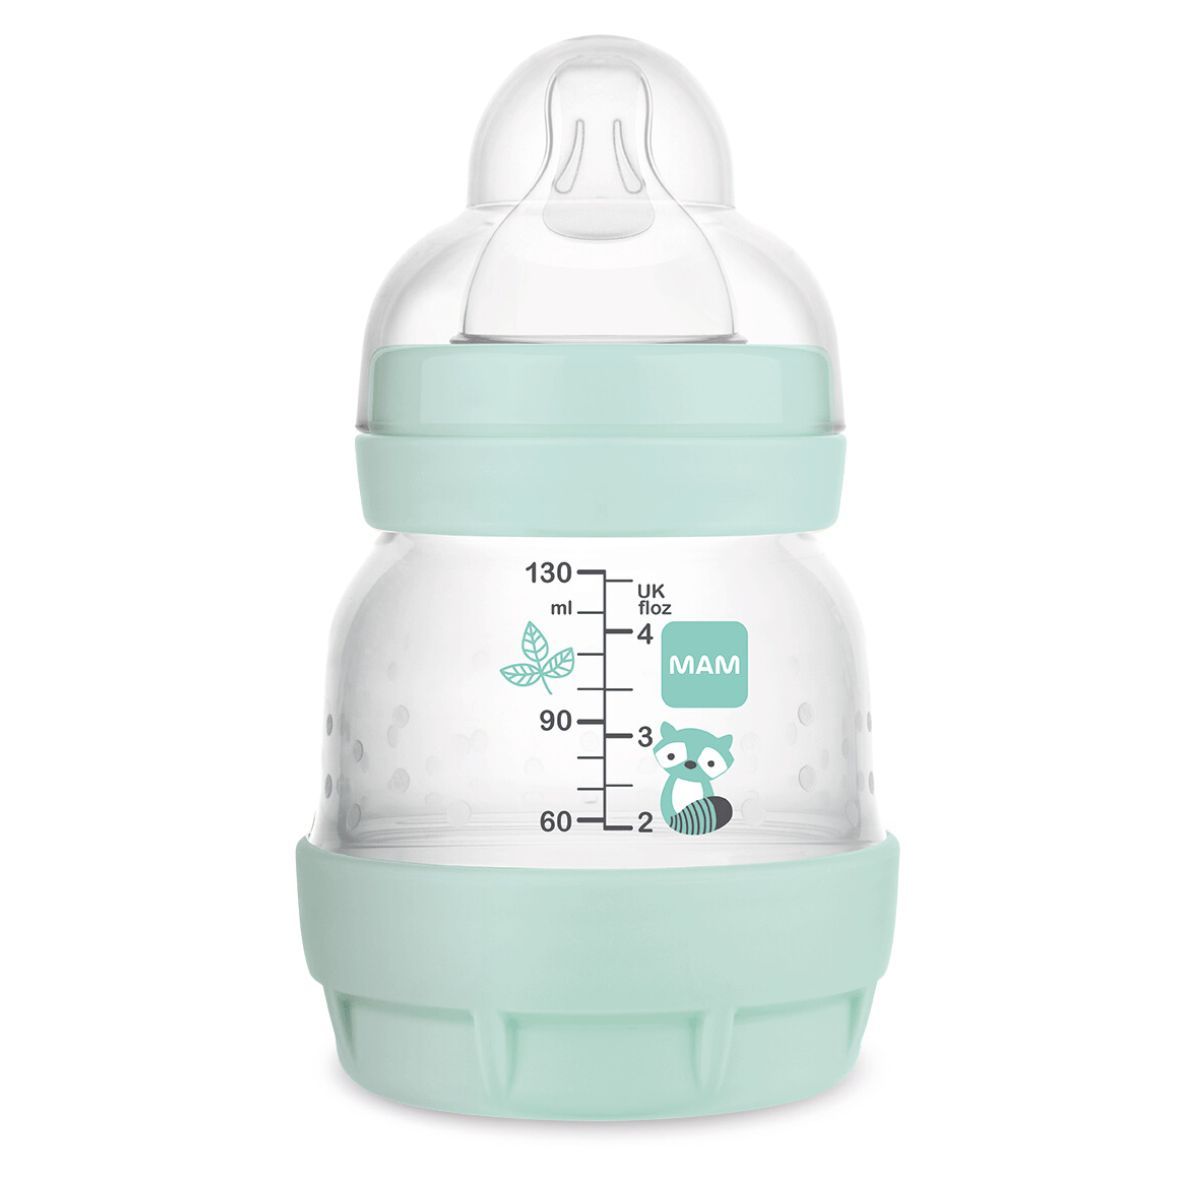    Easy Start™ Anti-Colic 130ml Colors of Nature